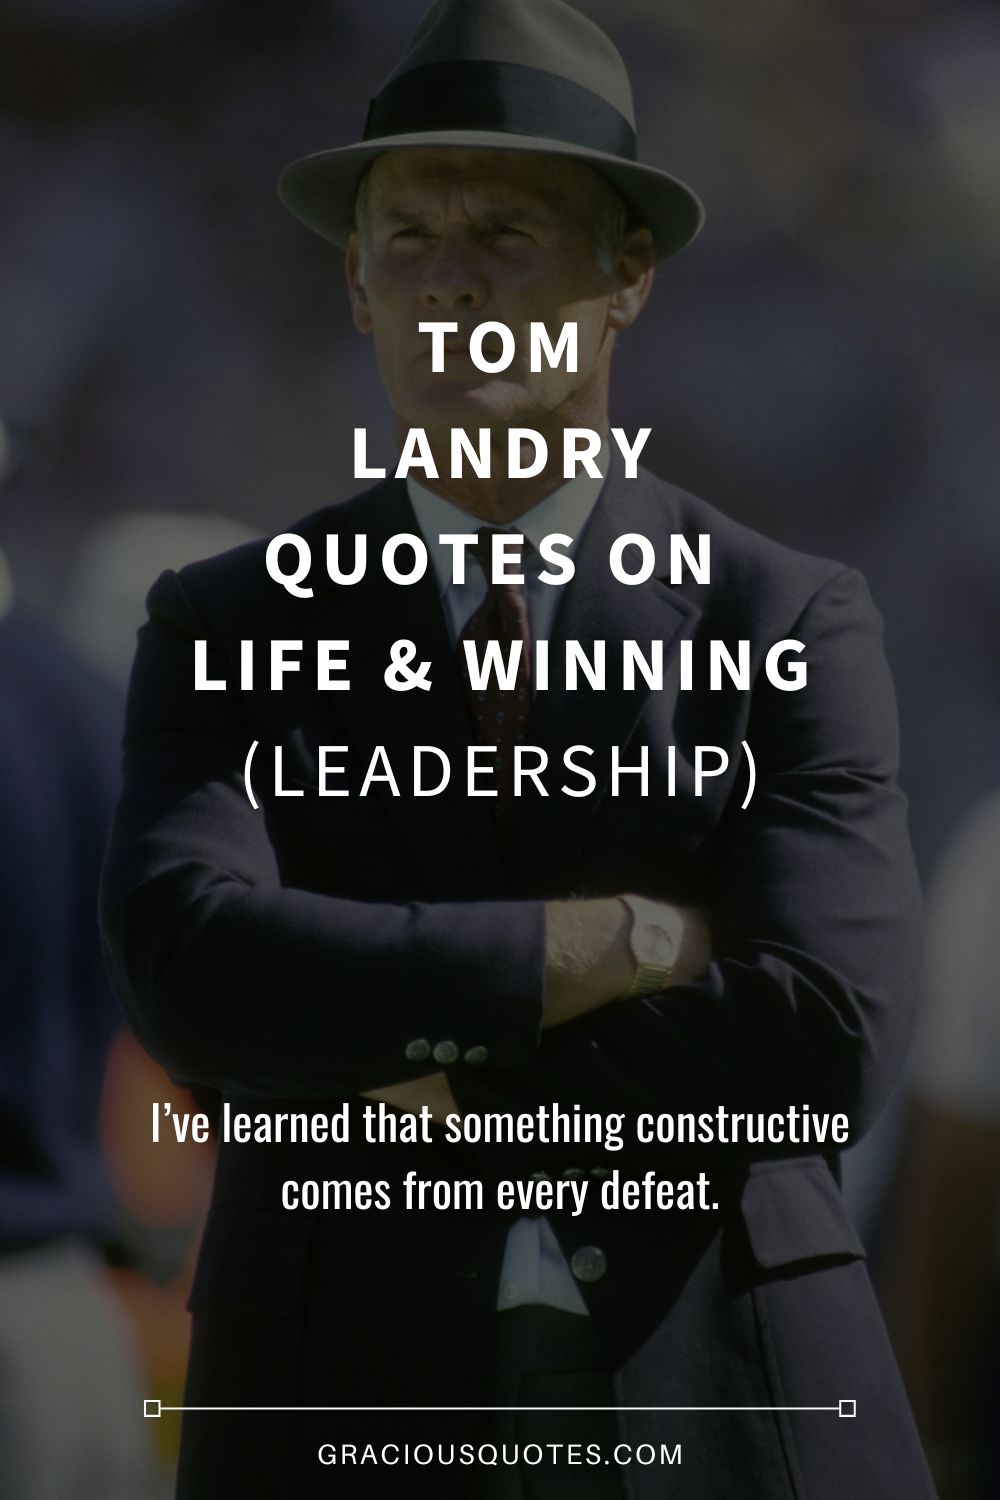 Tom Landry Quotes on Life & Winning (LEADERSHIP) - Gracious Quotes